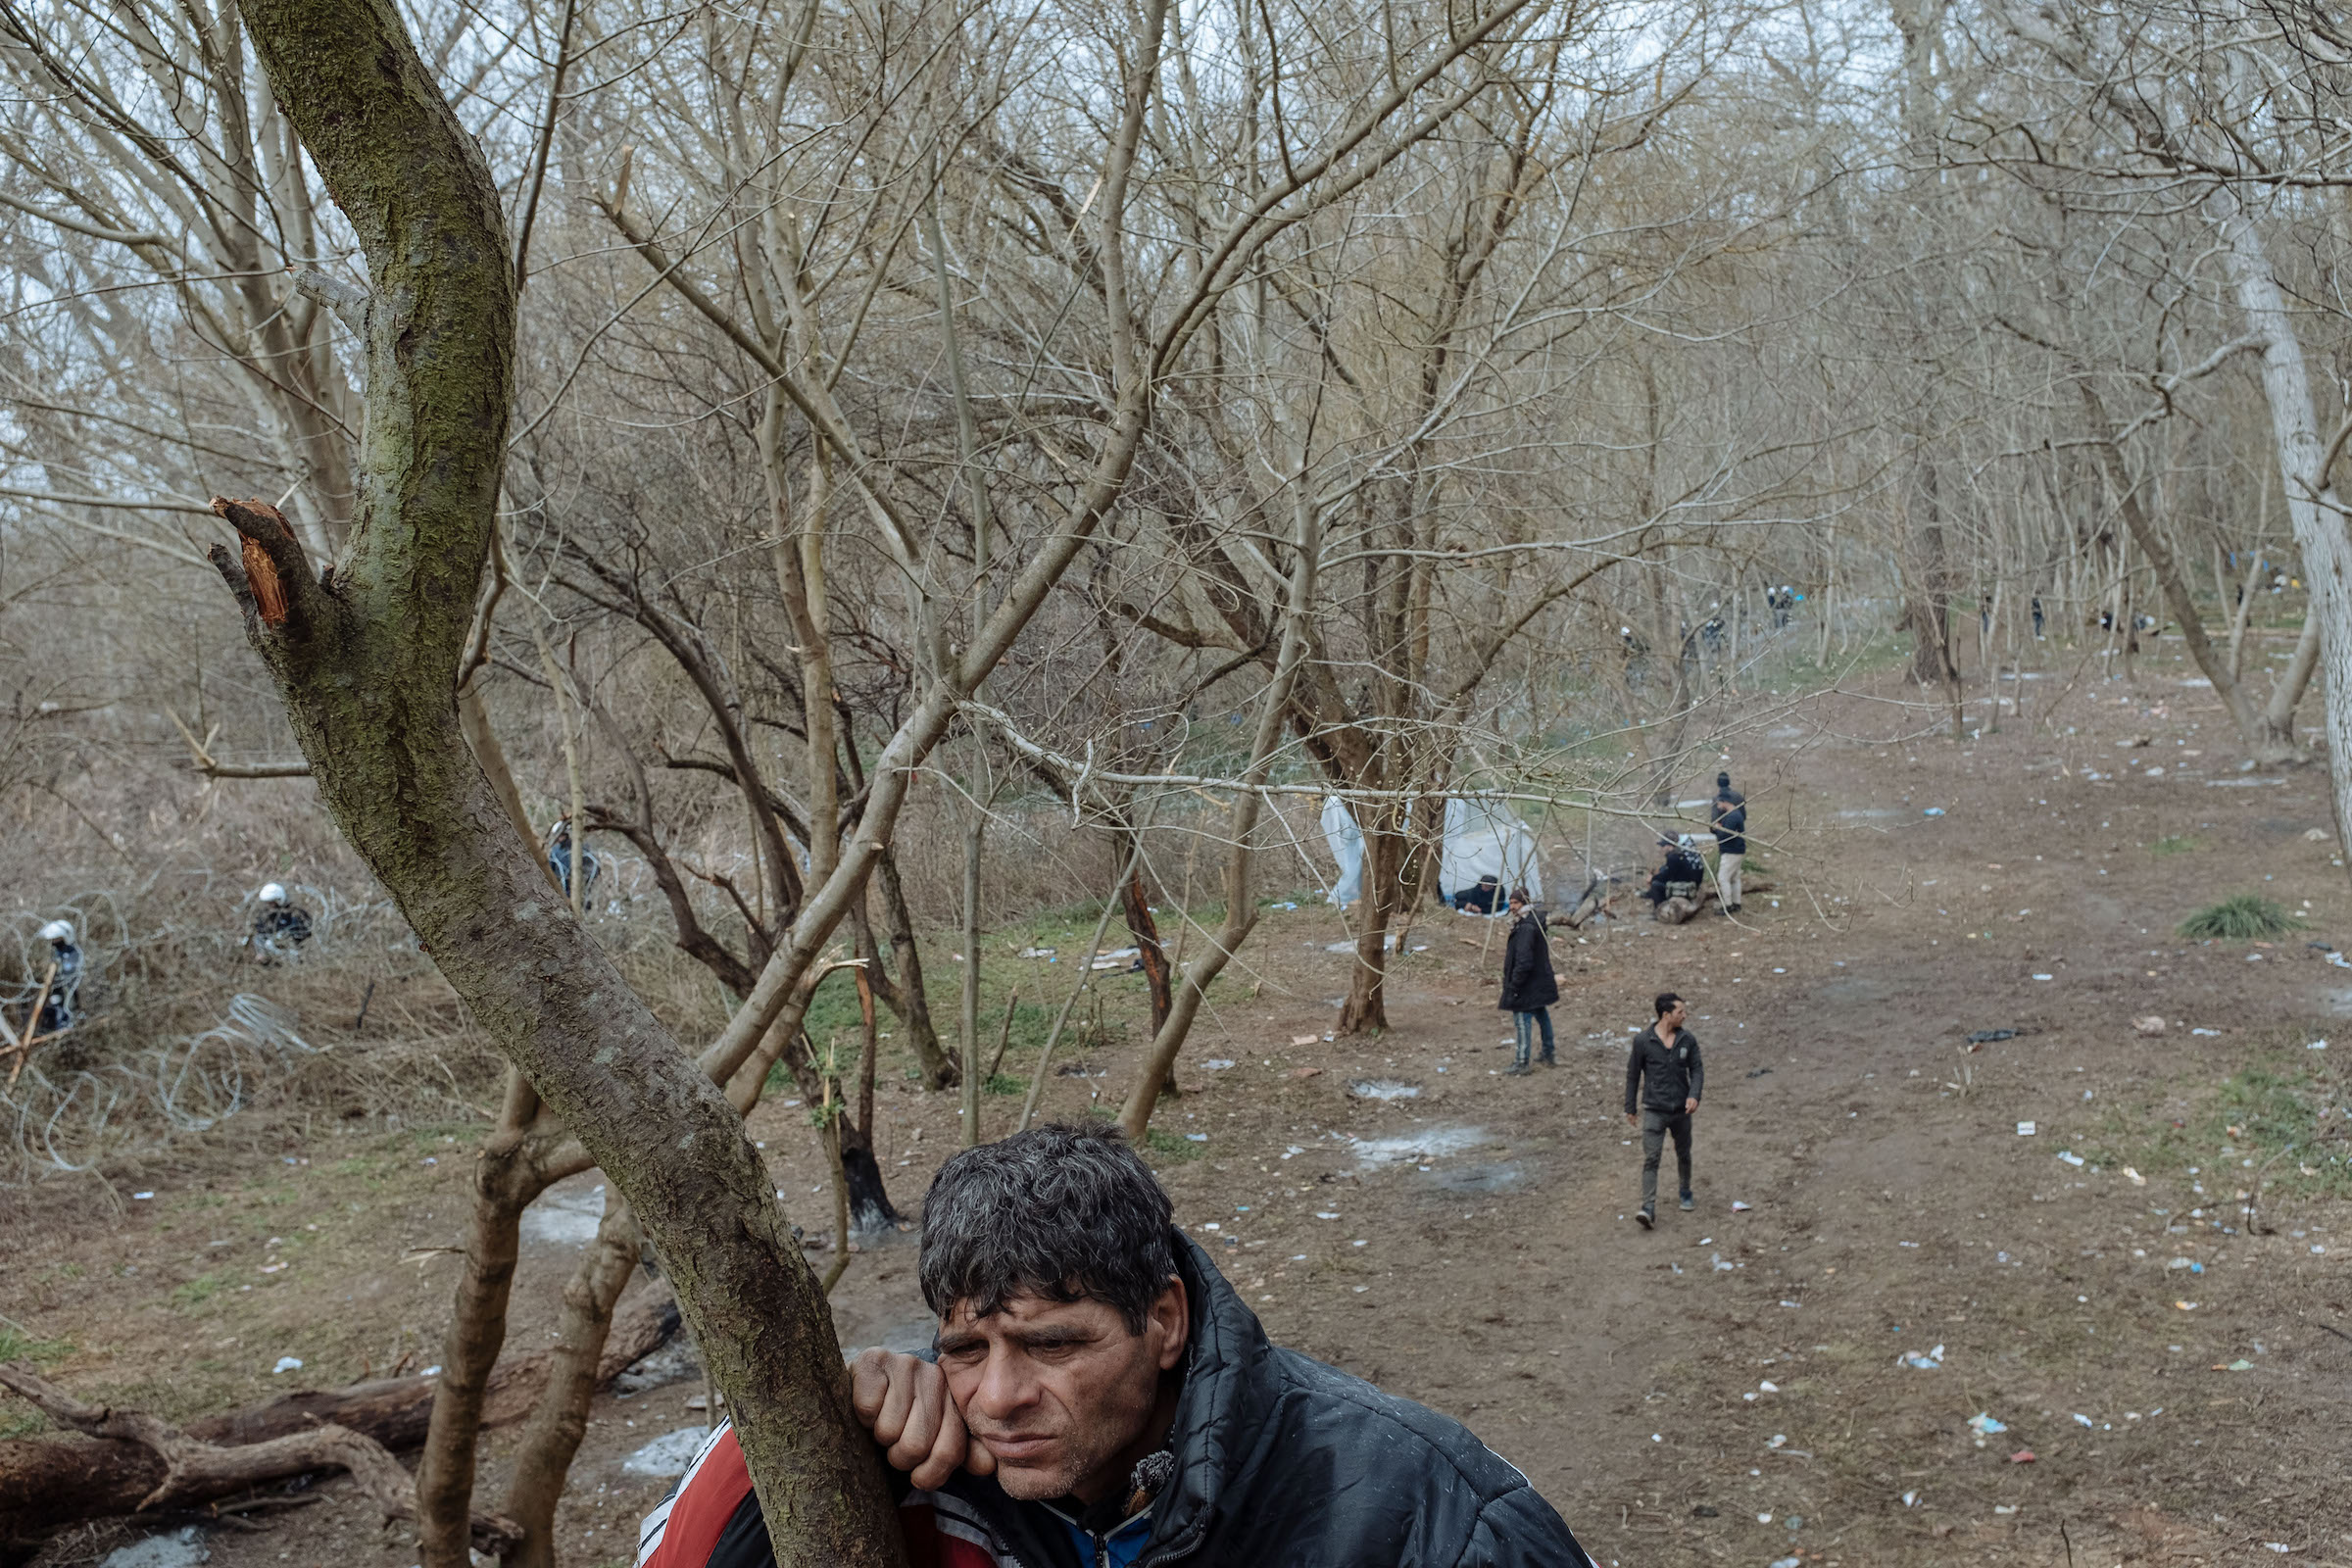 Muhammed, who fled Syria three years ago and was living in the Turkish city of Mersin, rests against a tree in Edirne.